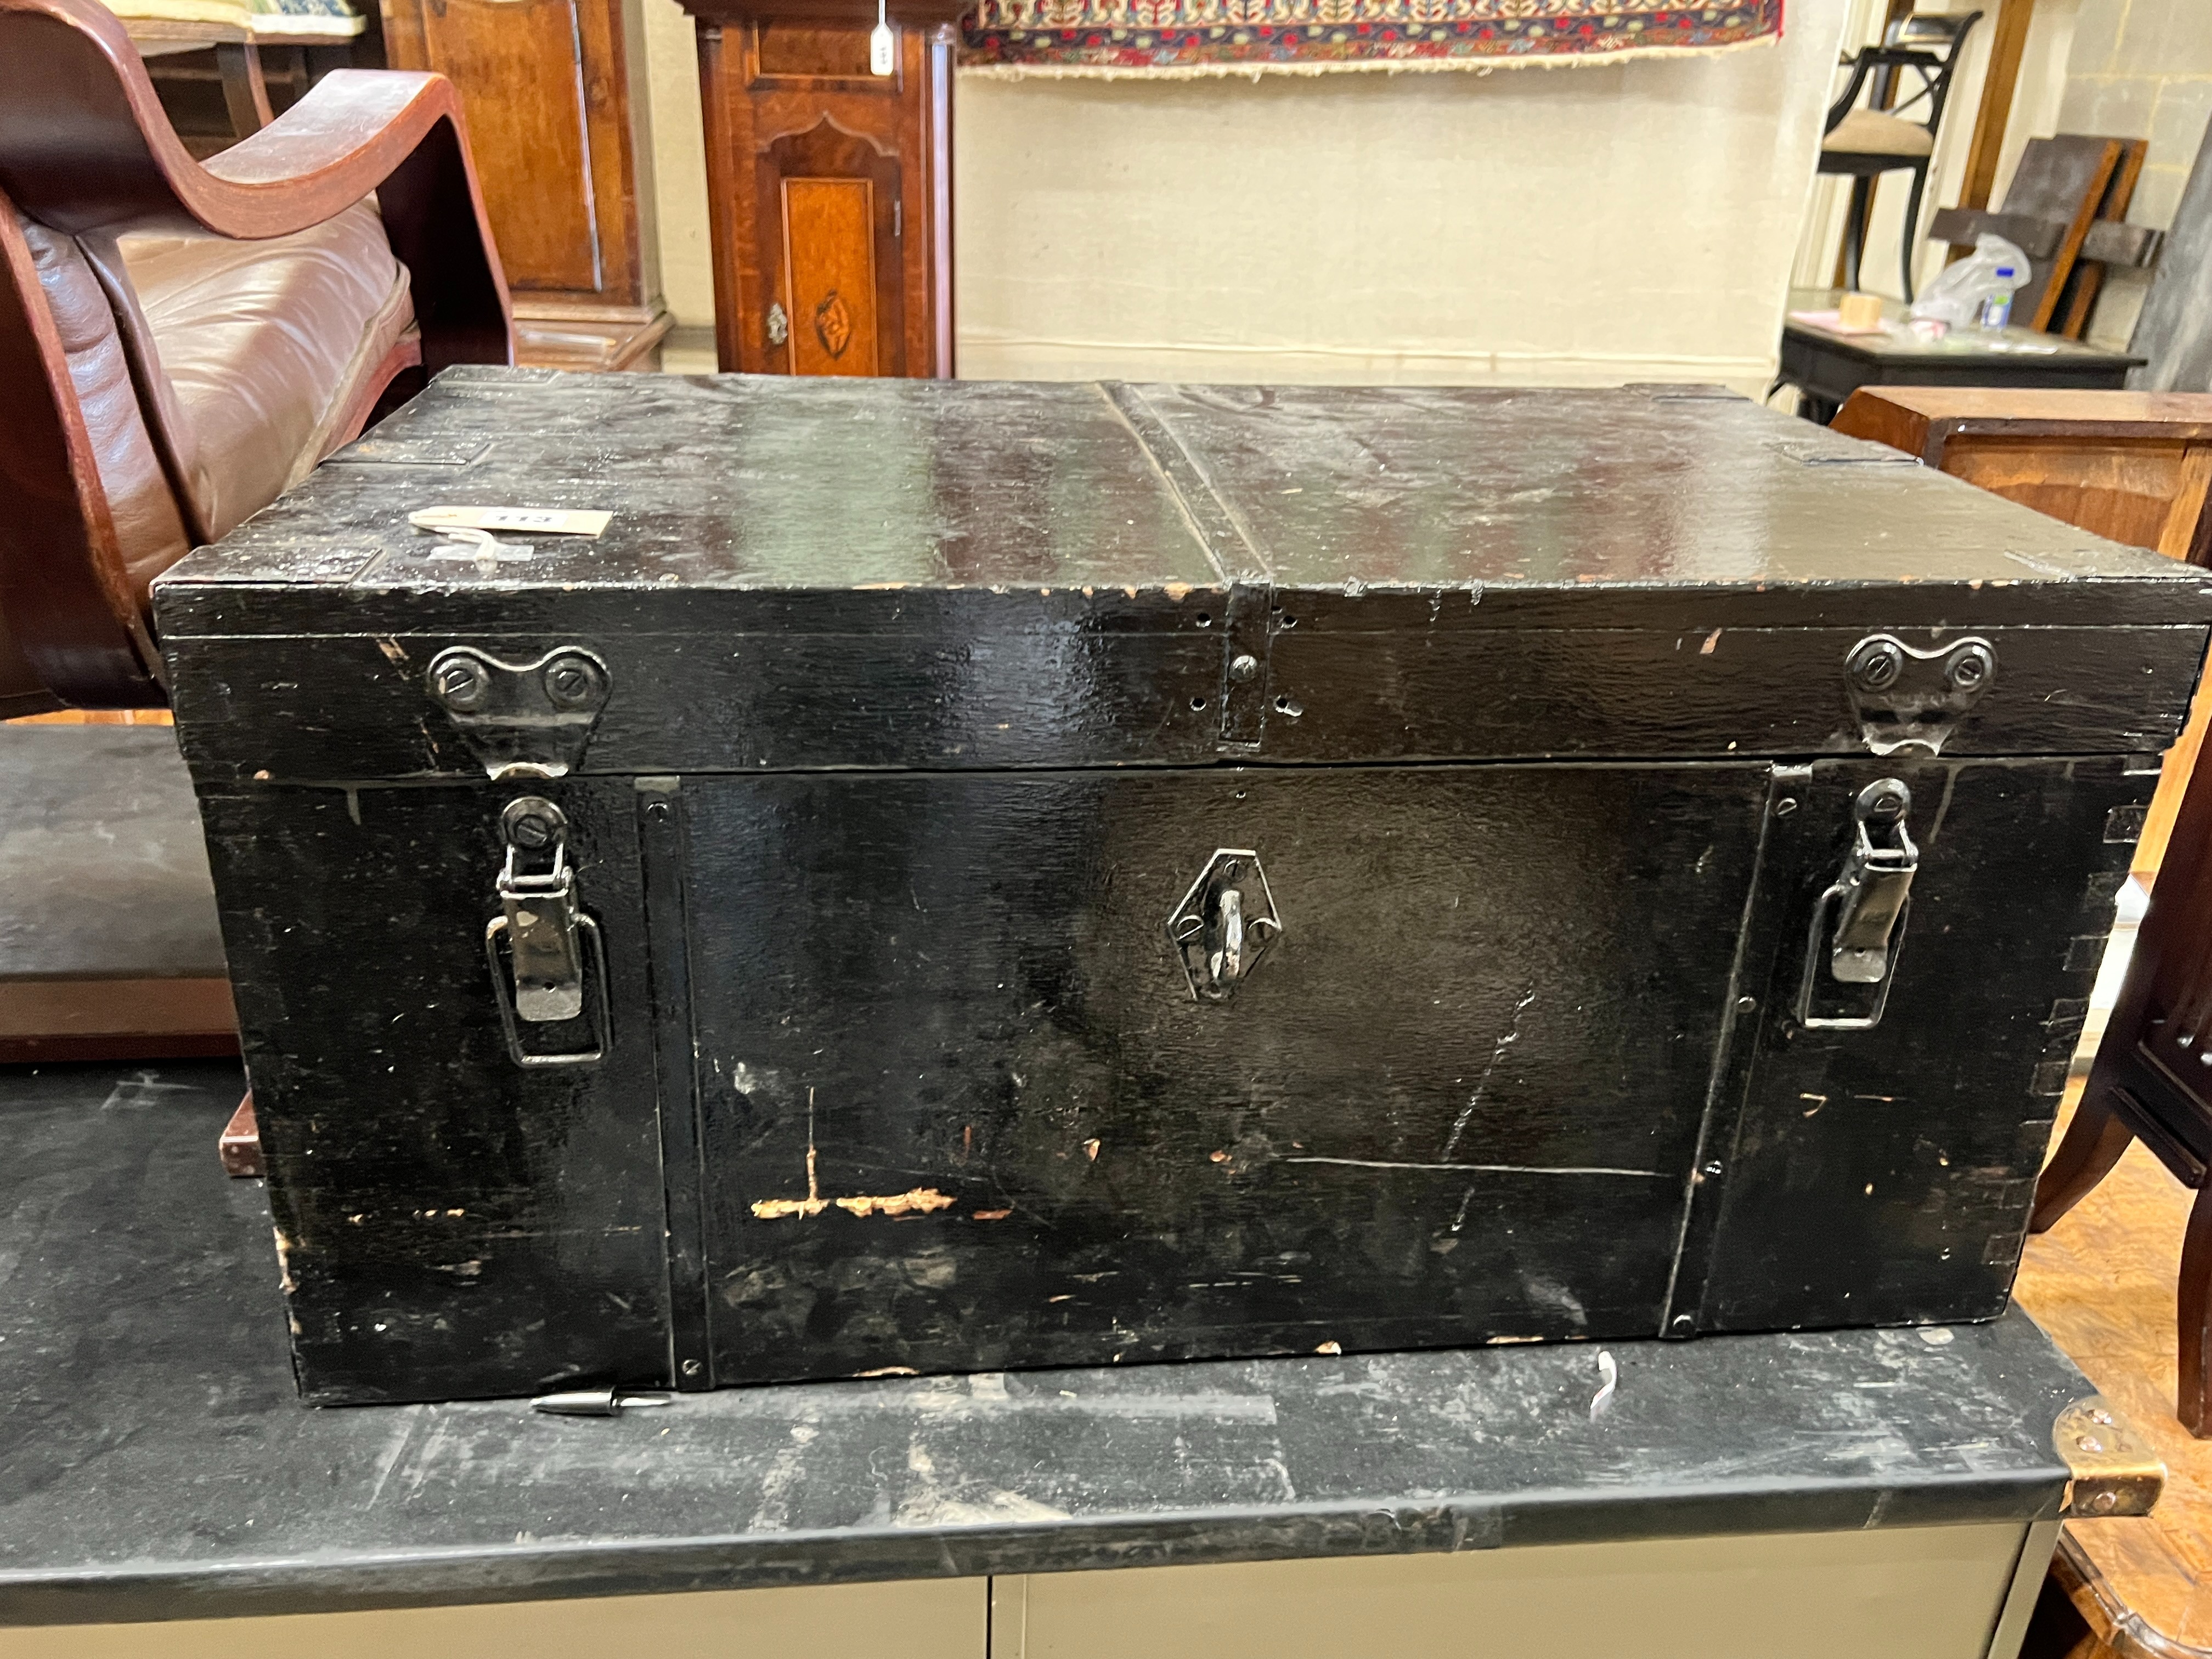 A painted iron bound chest containing a large quantity of assorted hand tools